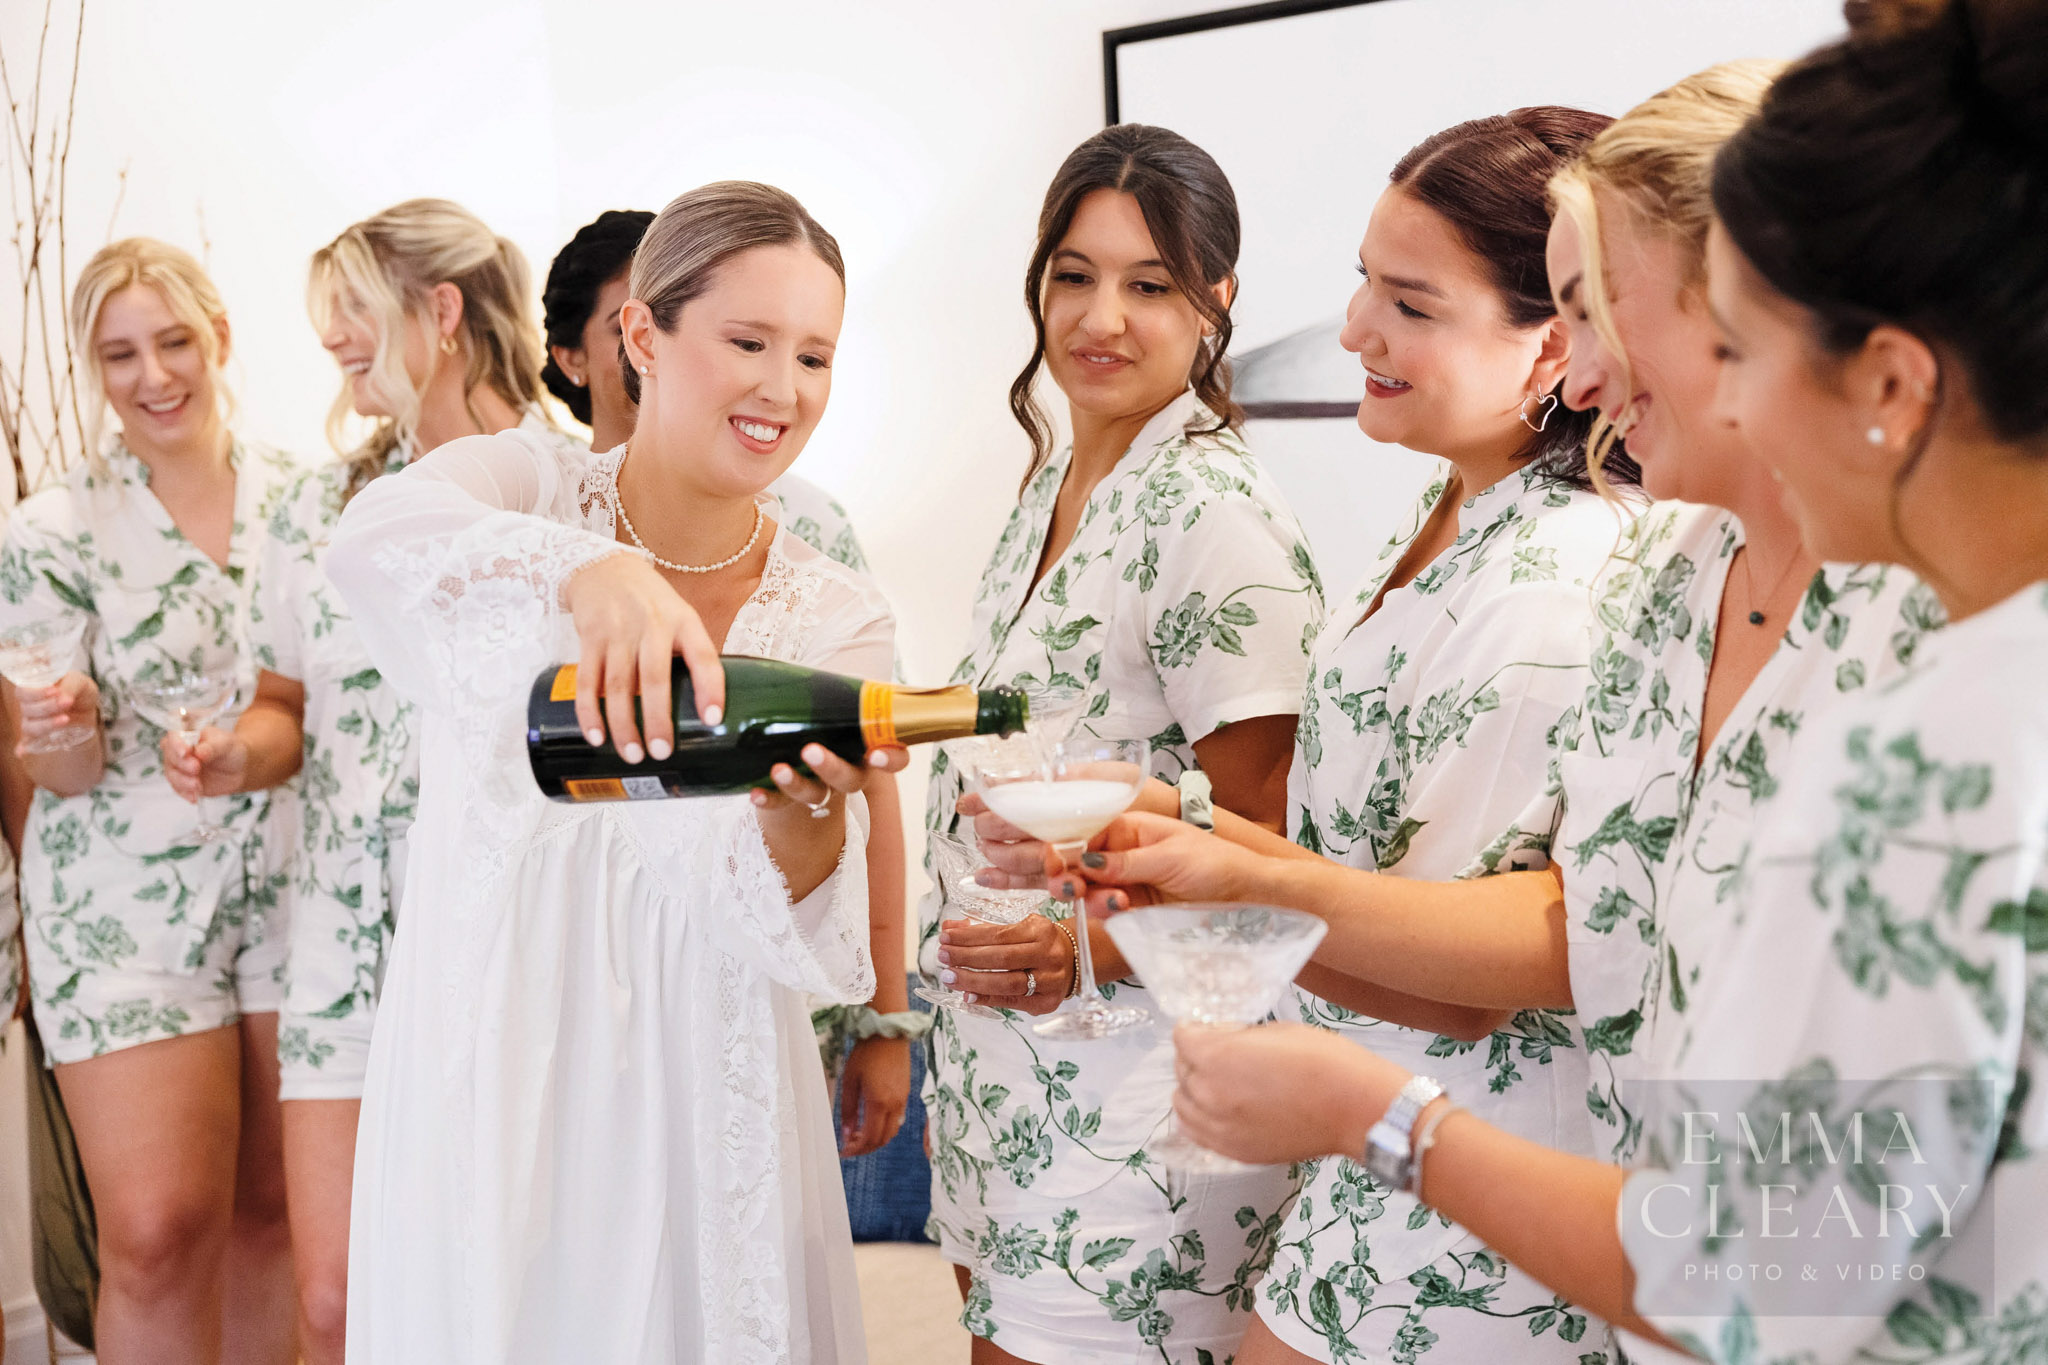 The bridesmaids drinking champagne